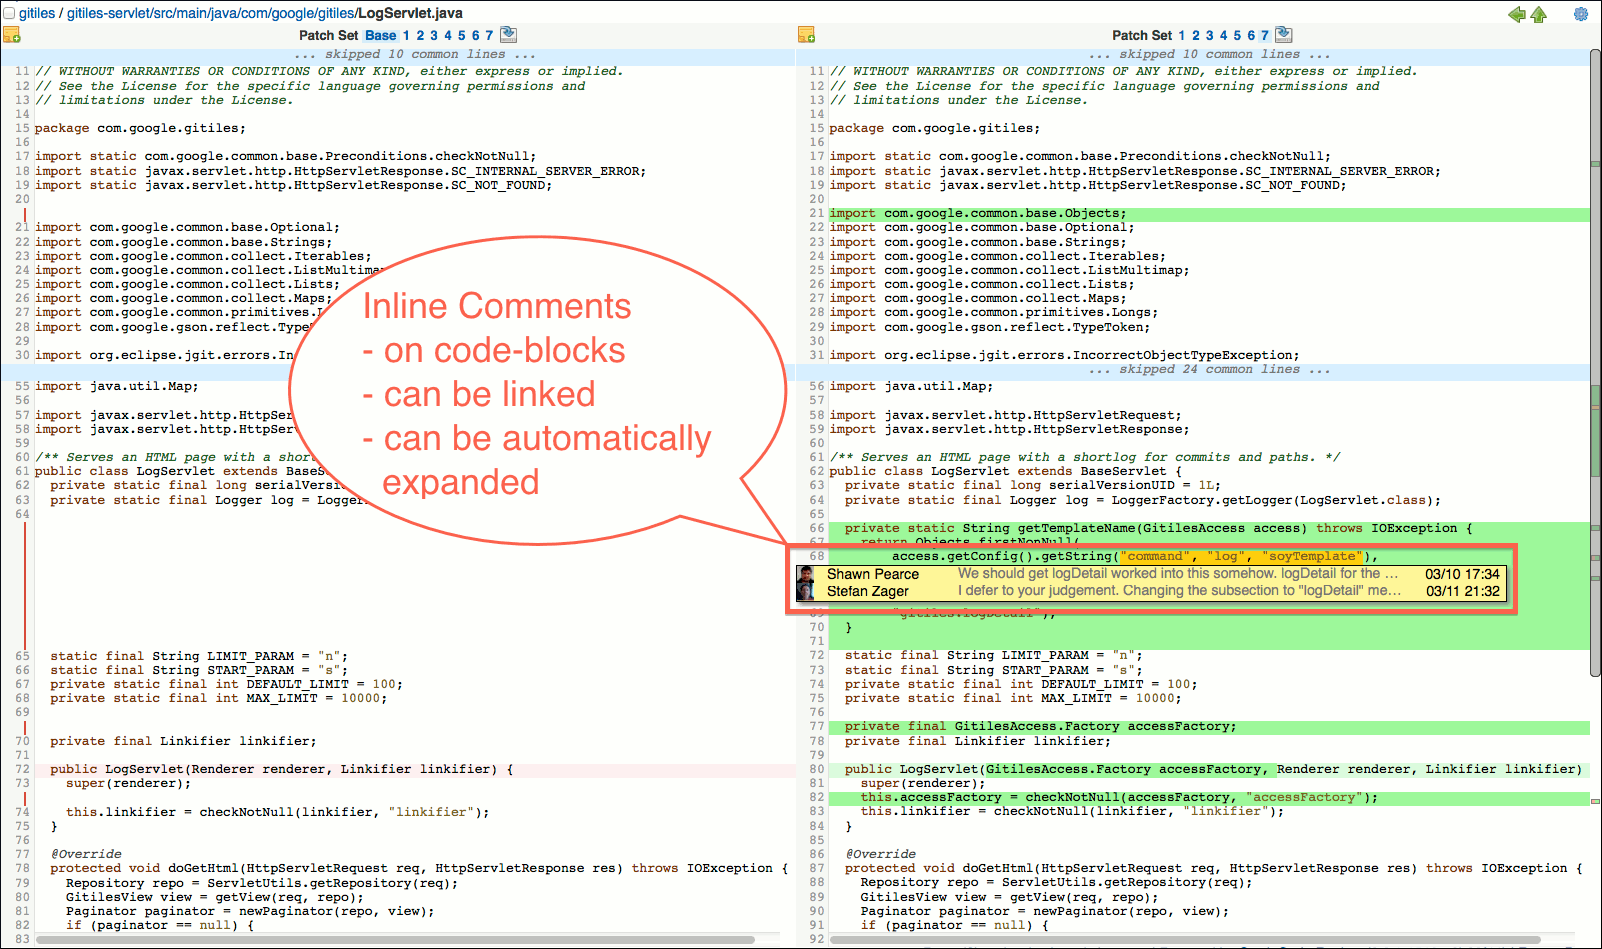 gwt user review ui side by side diff screen inline comments